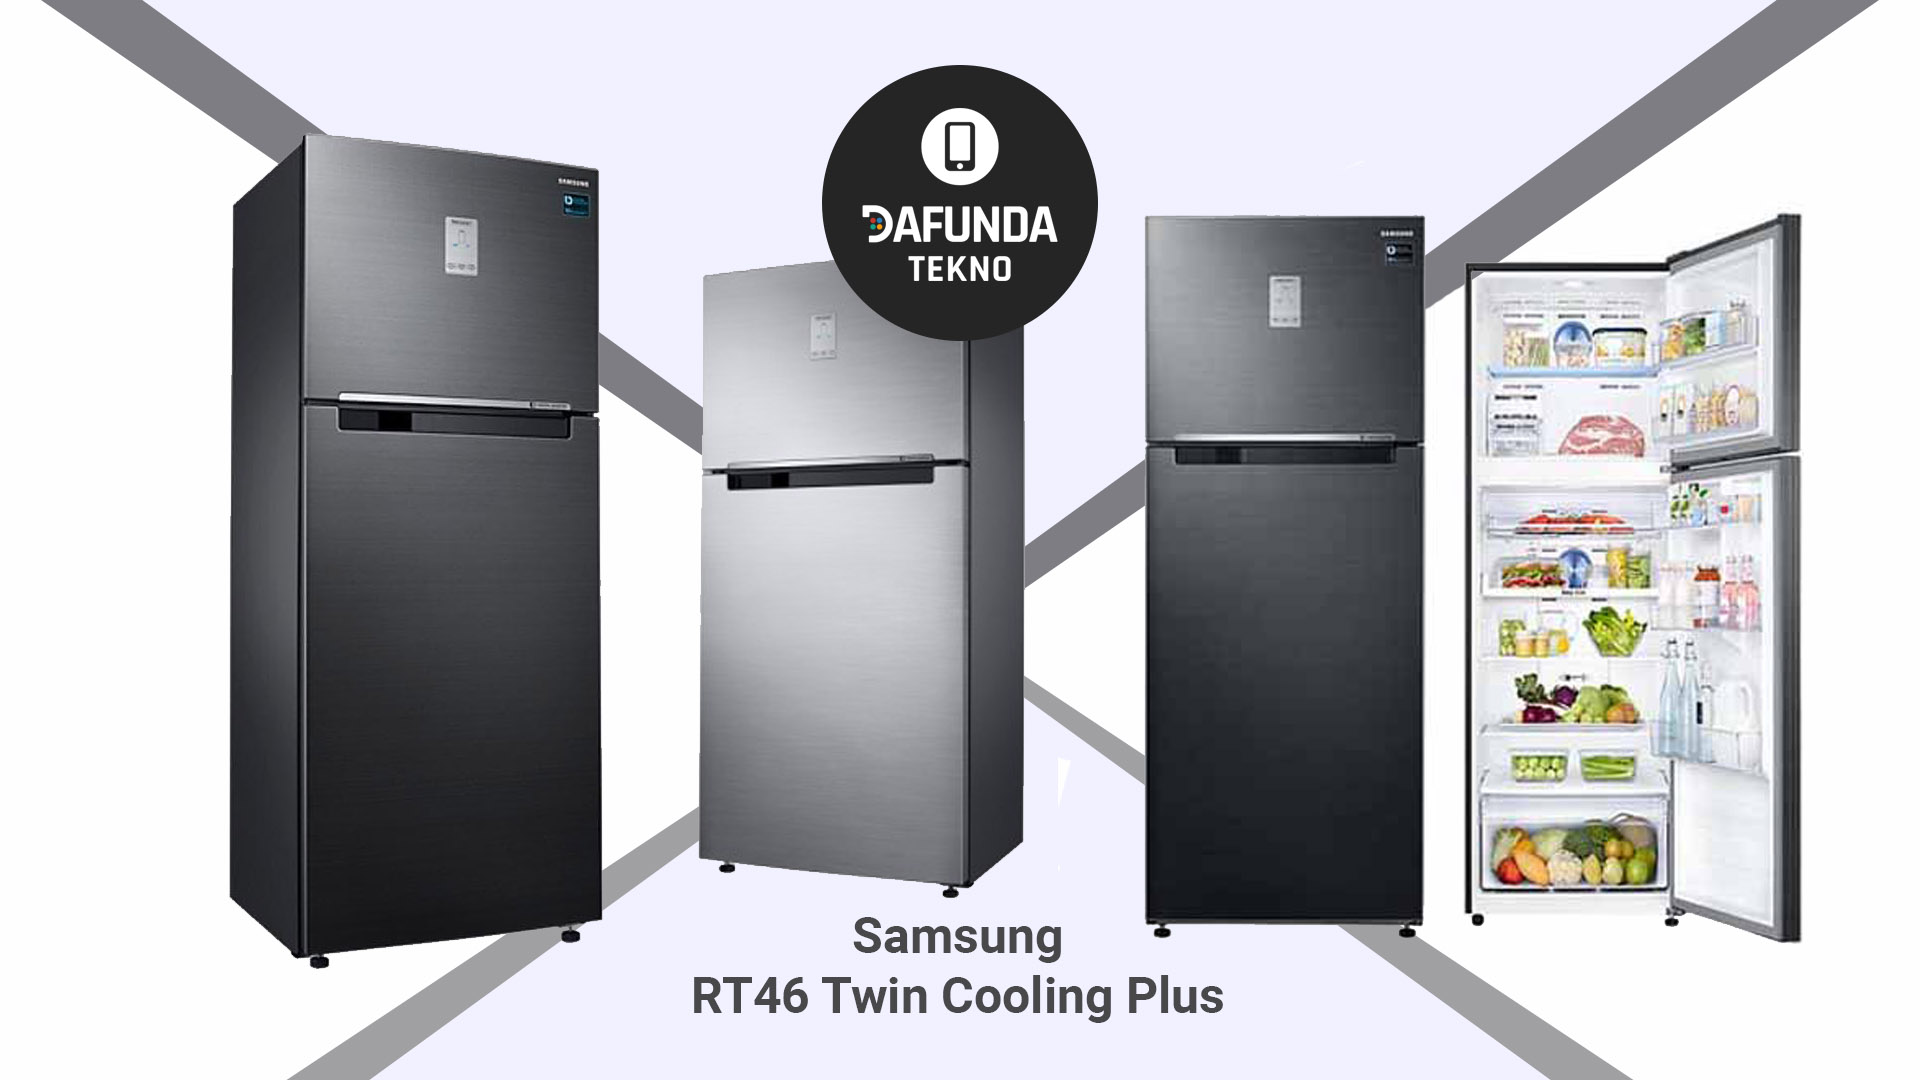 Samsung Rt46 Twin Cooling Plus